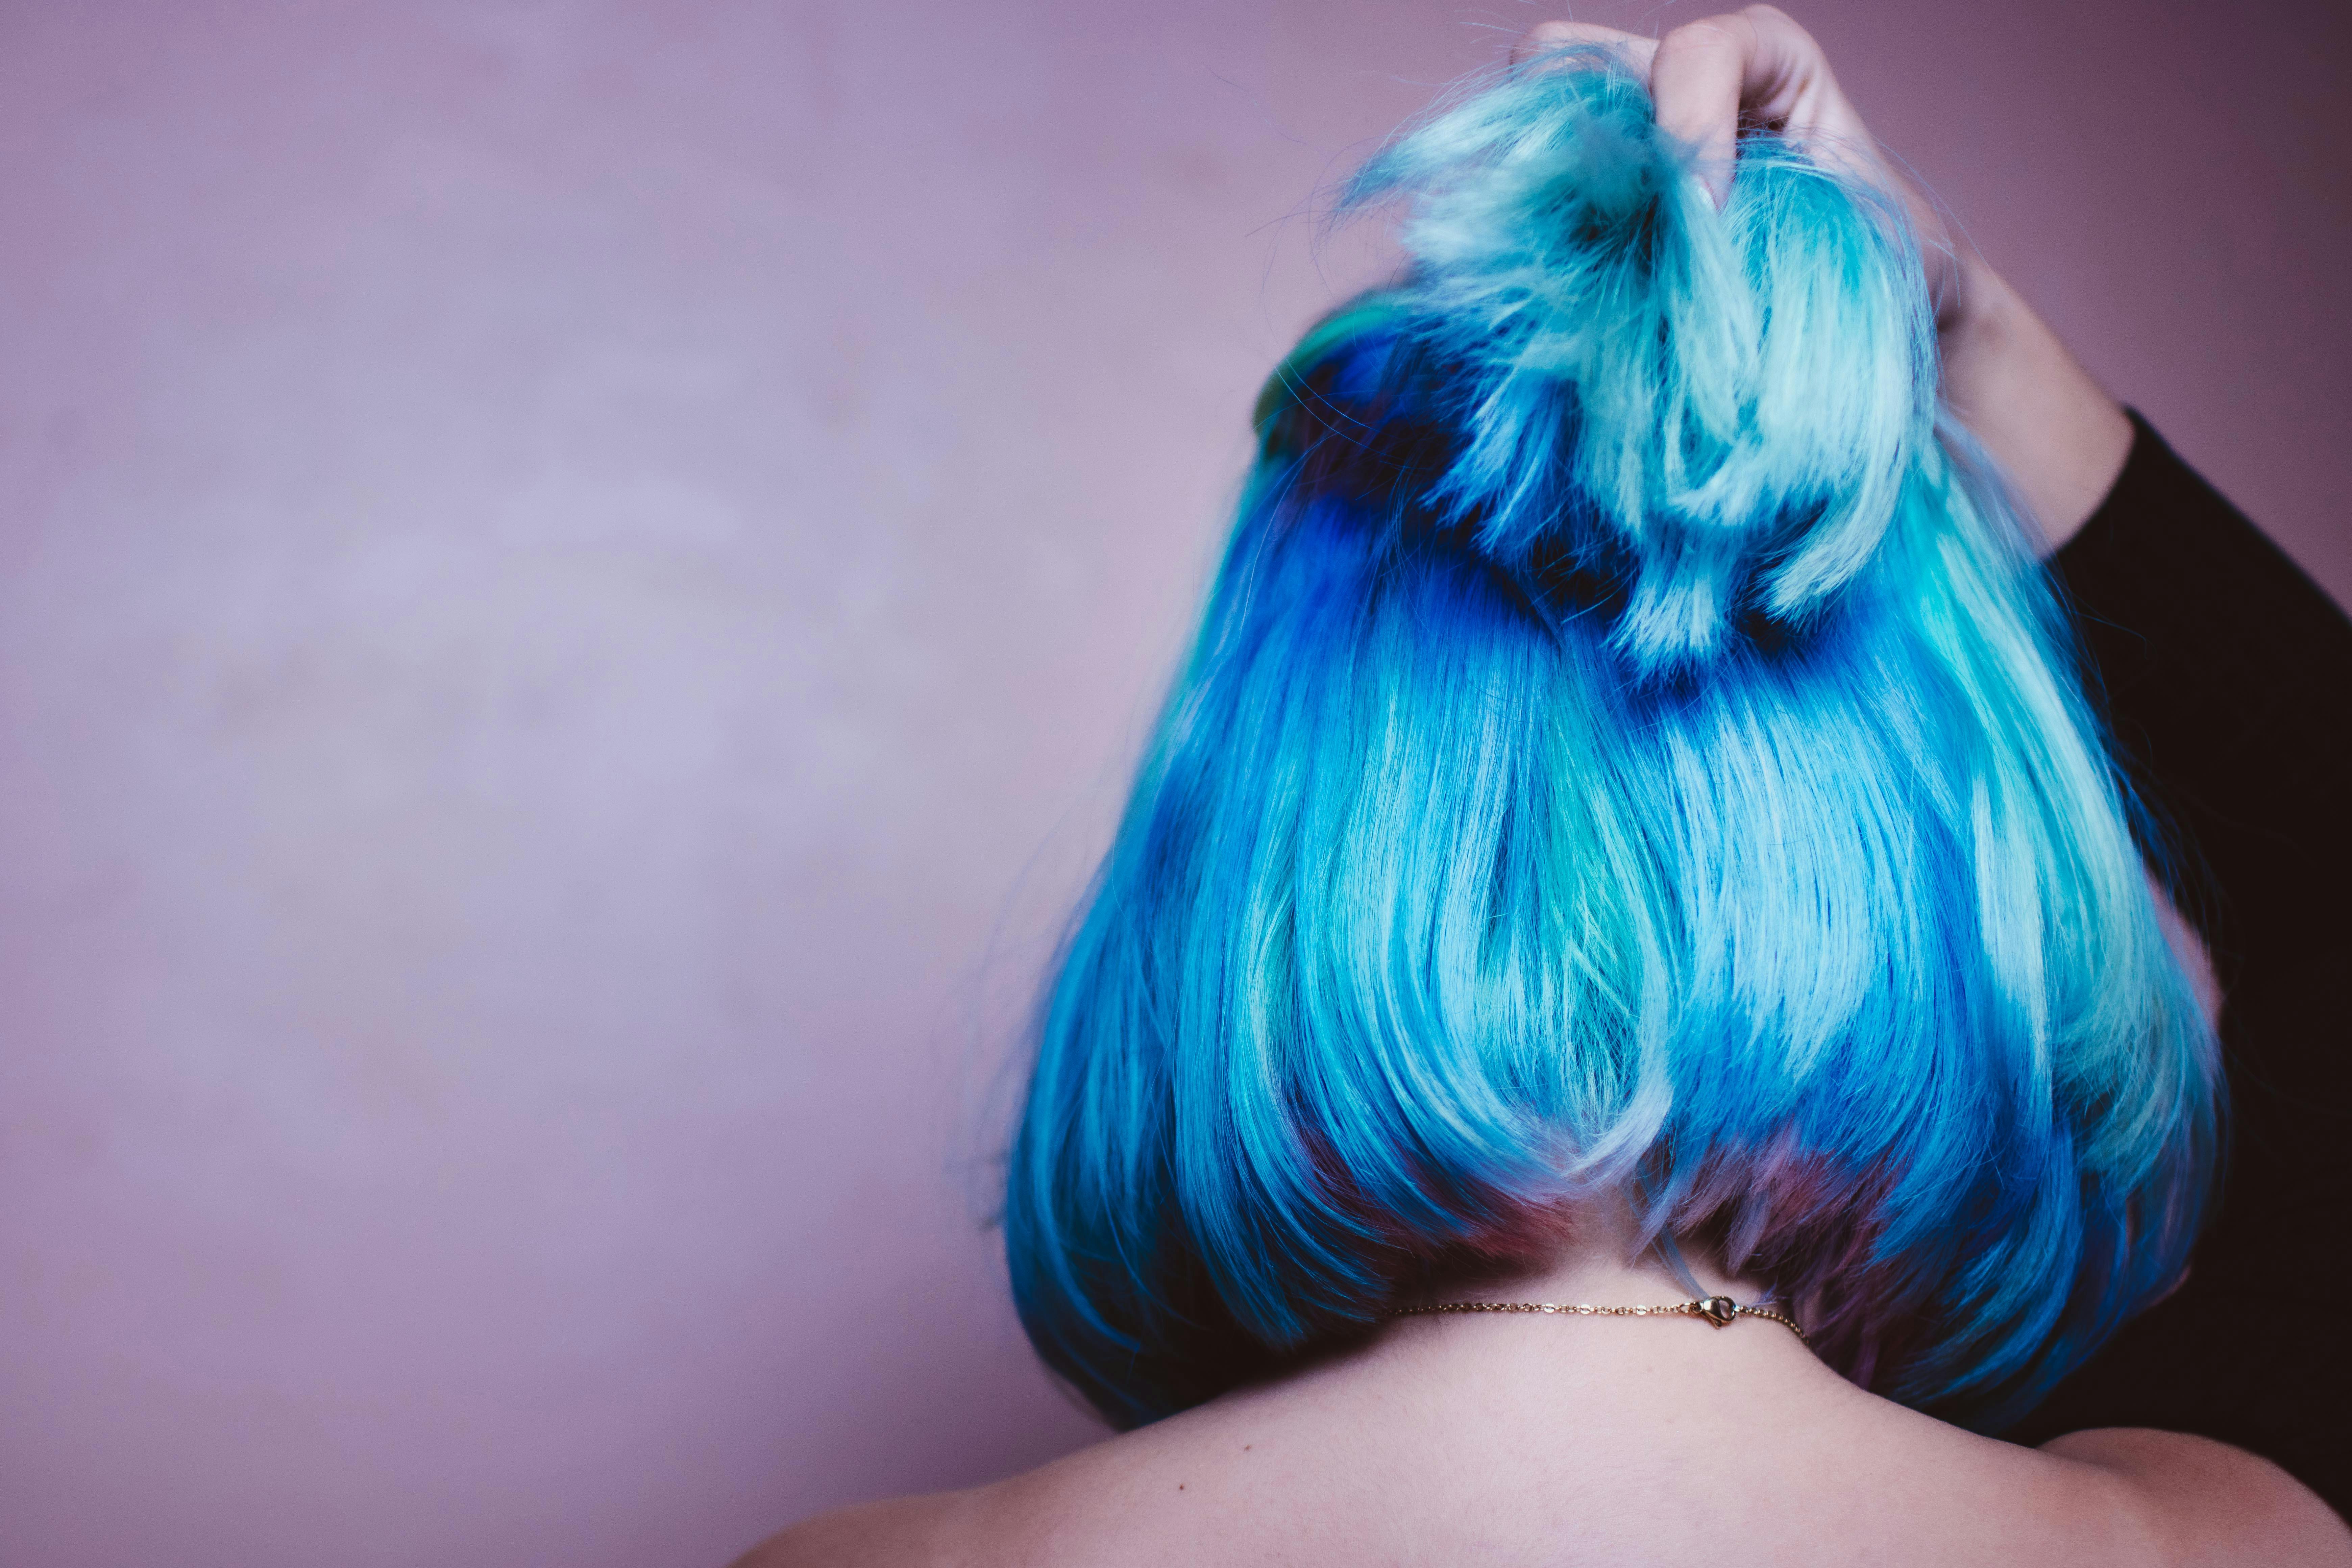 Psychological Analysis of Dreams About Blue Hair - wide 6